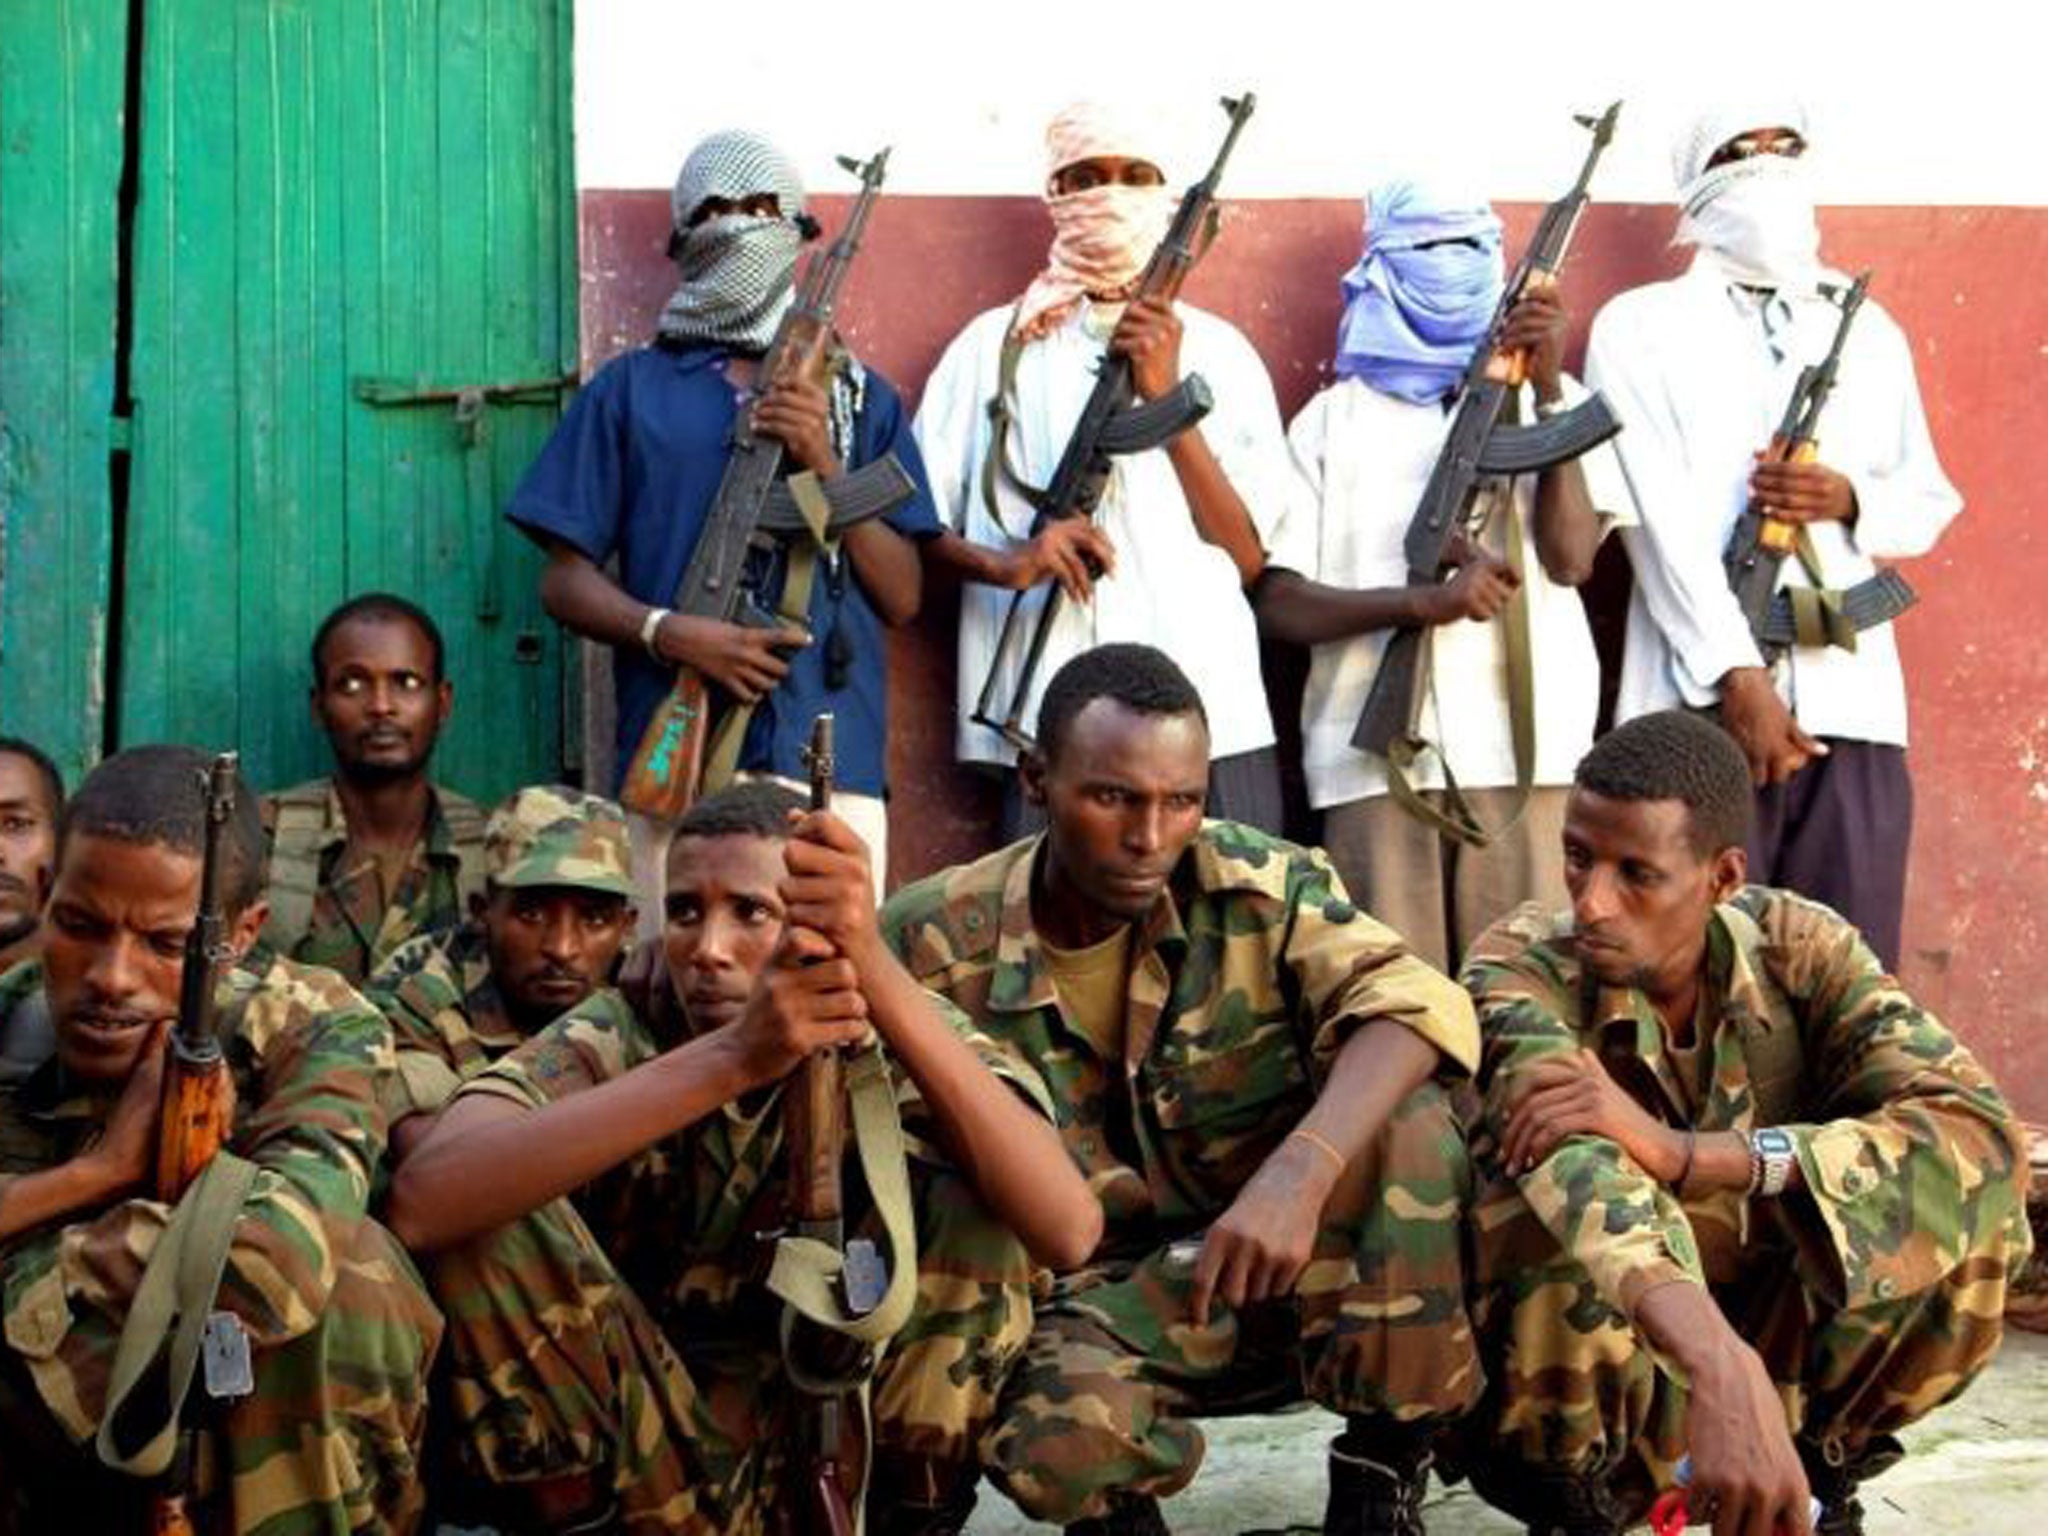 Masked captors: Islamist insurgents with soldiers rounded up in Somalia, 2008